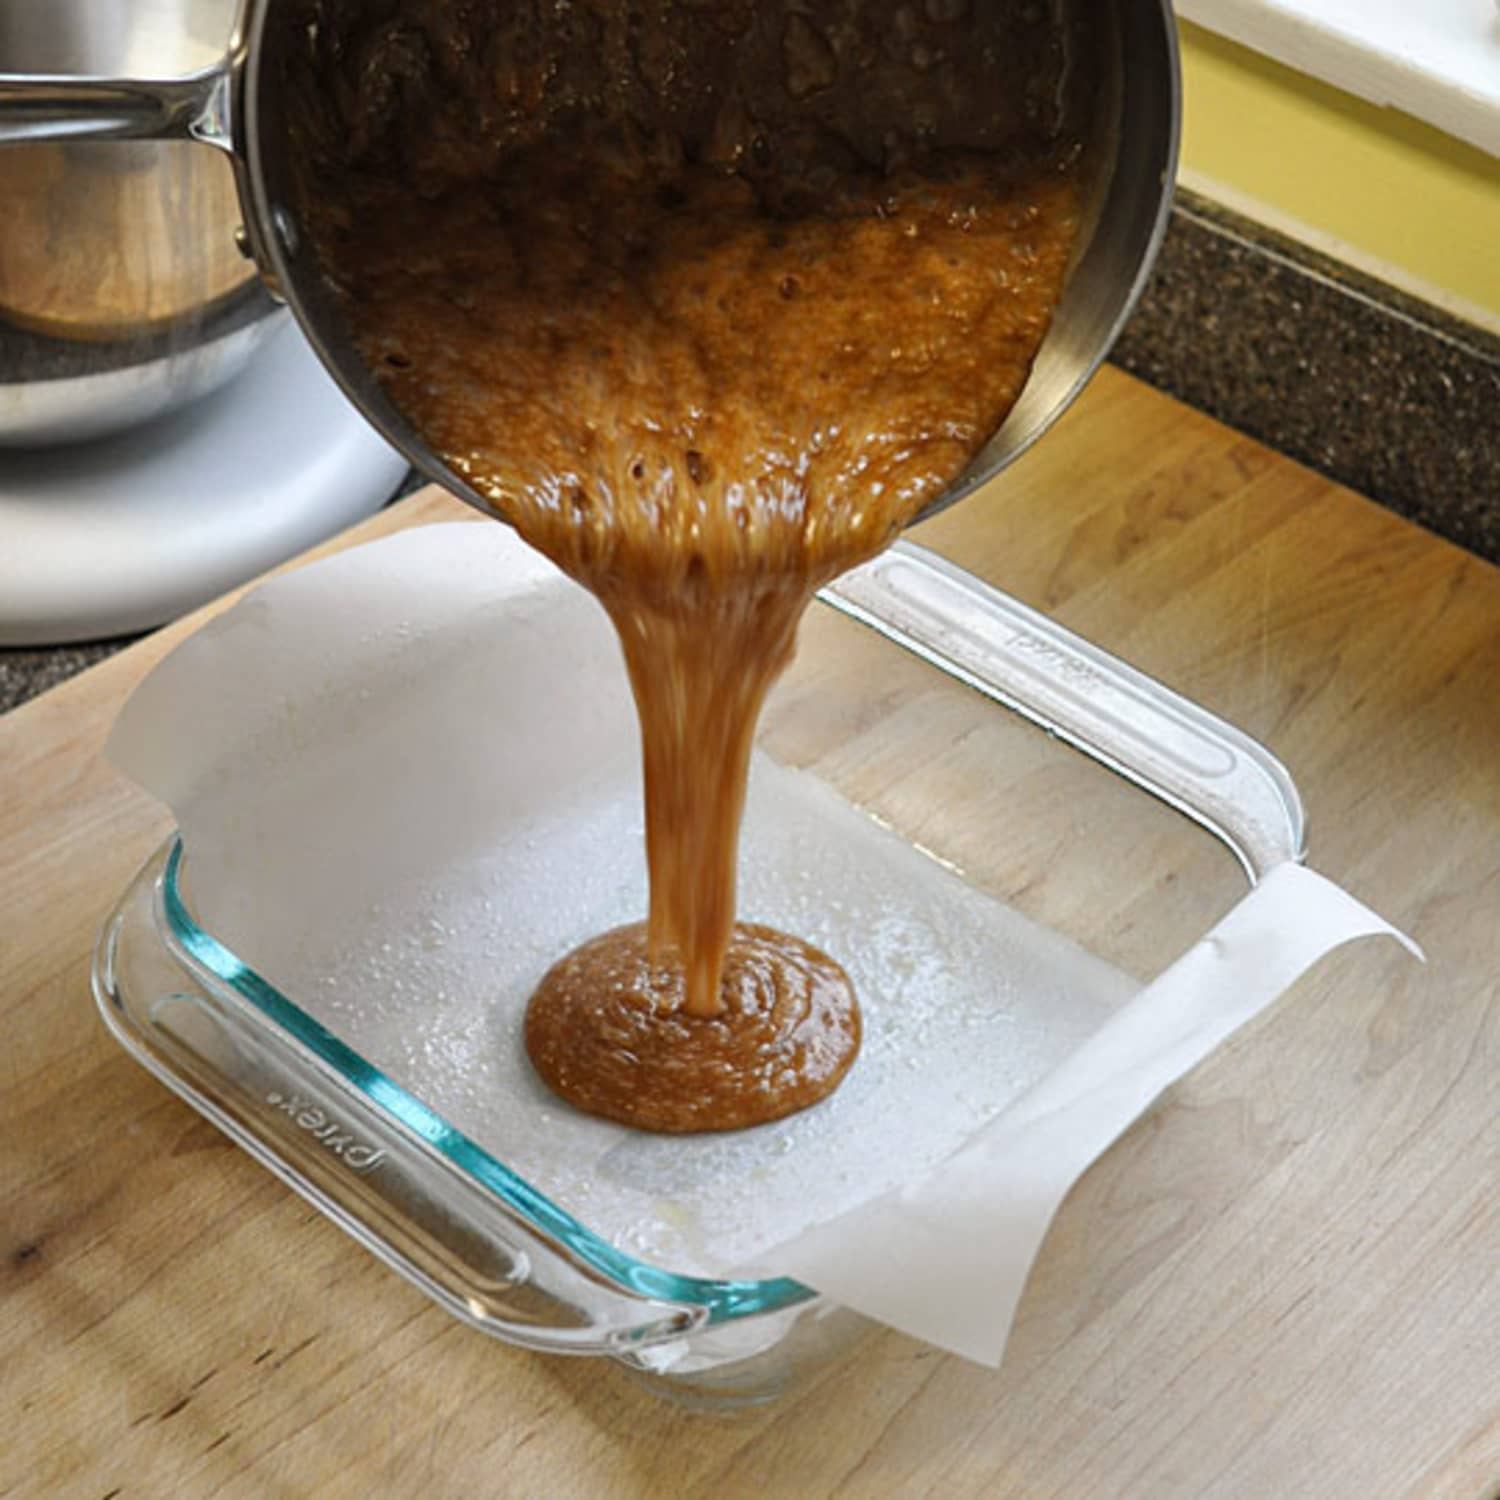 How to Clean Candy (and Other Sticky Stuff) From a Pot